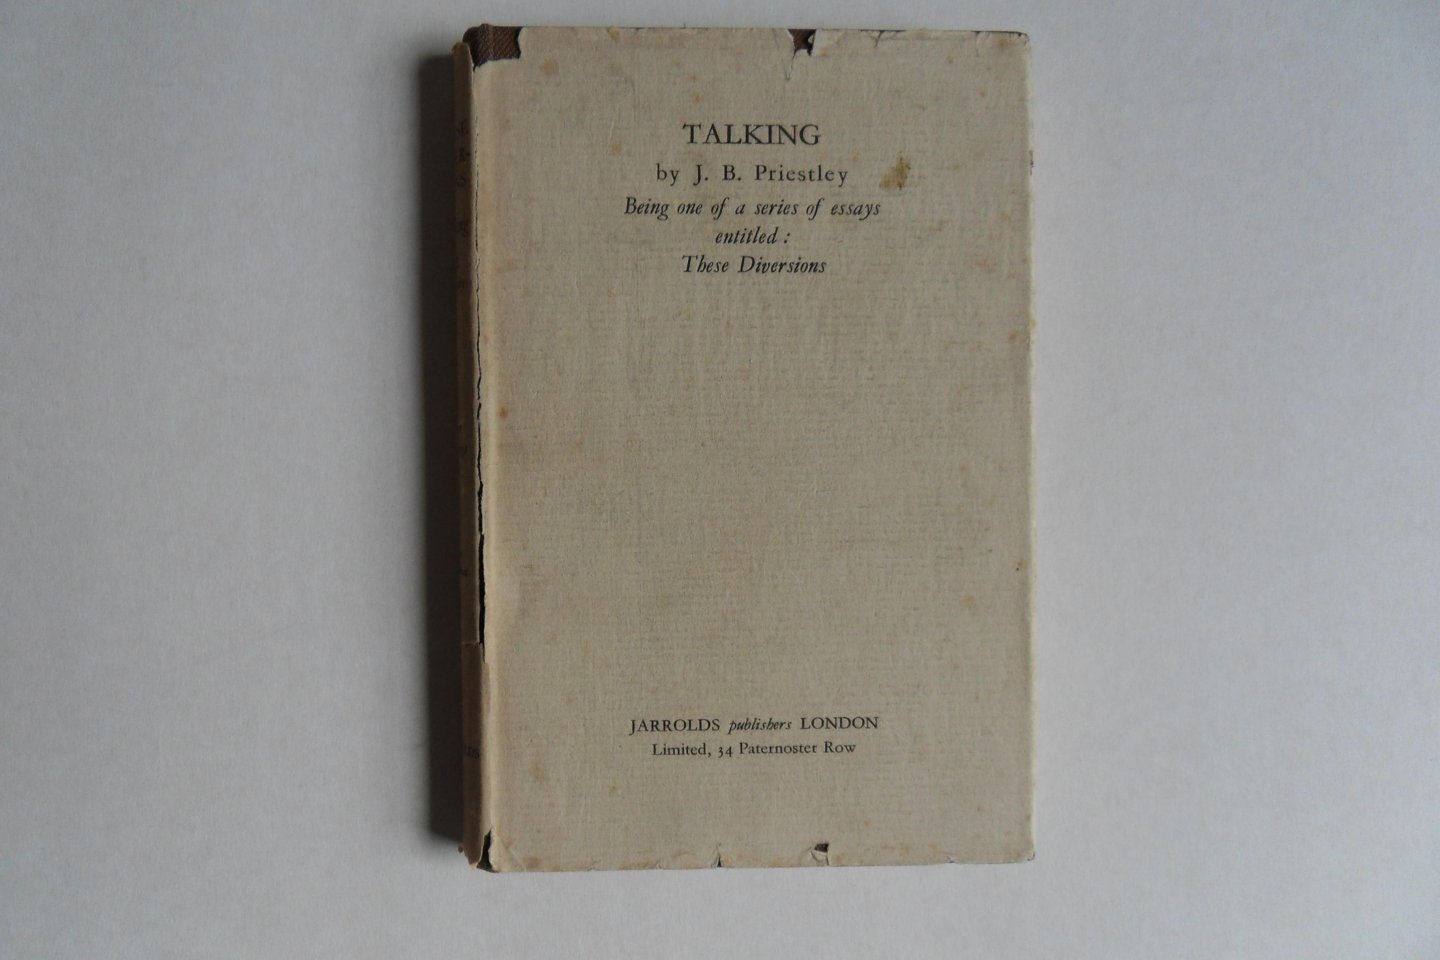 Priestley, J.B. - Talking. - Being one of a series of essays entitled: These Diversions. [ FIRST edition ].